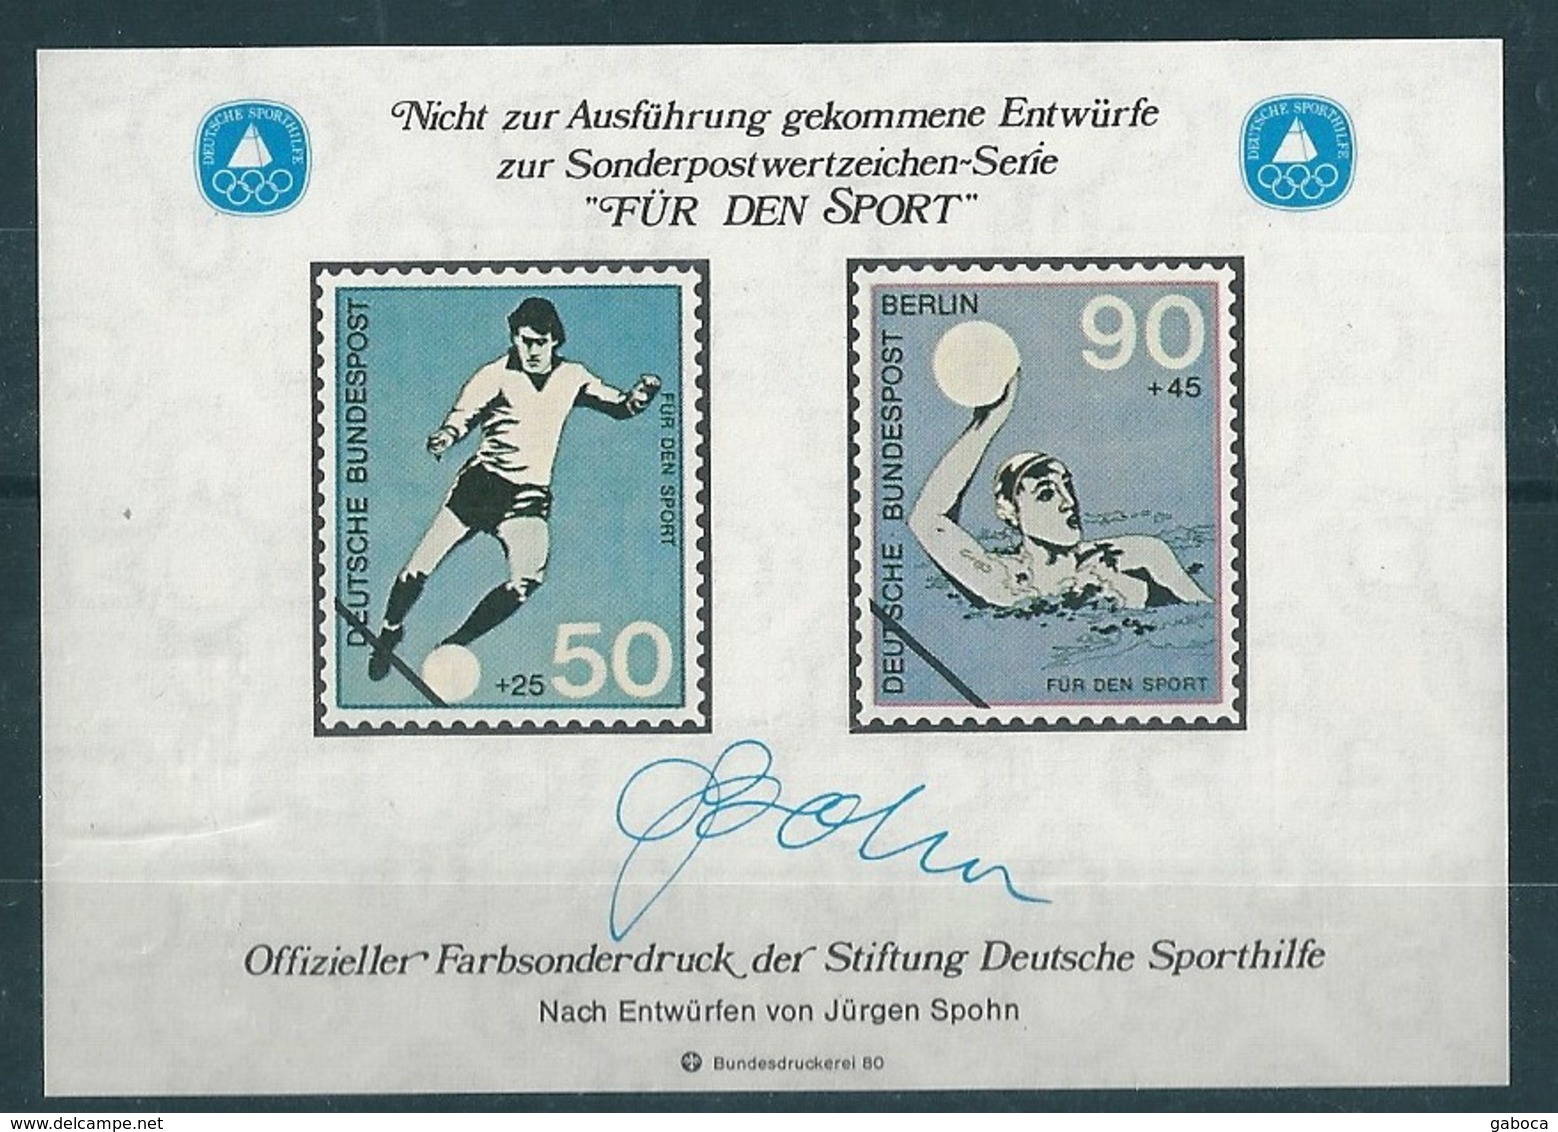 2107 Germany Berlin For Sport Aid Water Polo Football Soccer Official Special Colour Print 3xS/S MNH Lot#99 - Water Polo